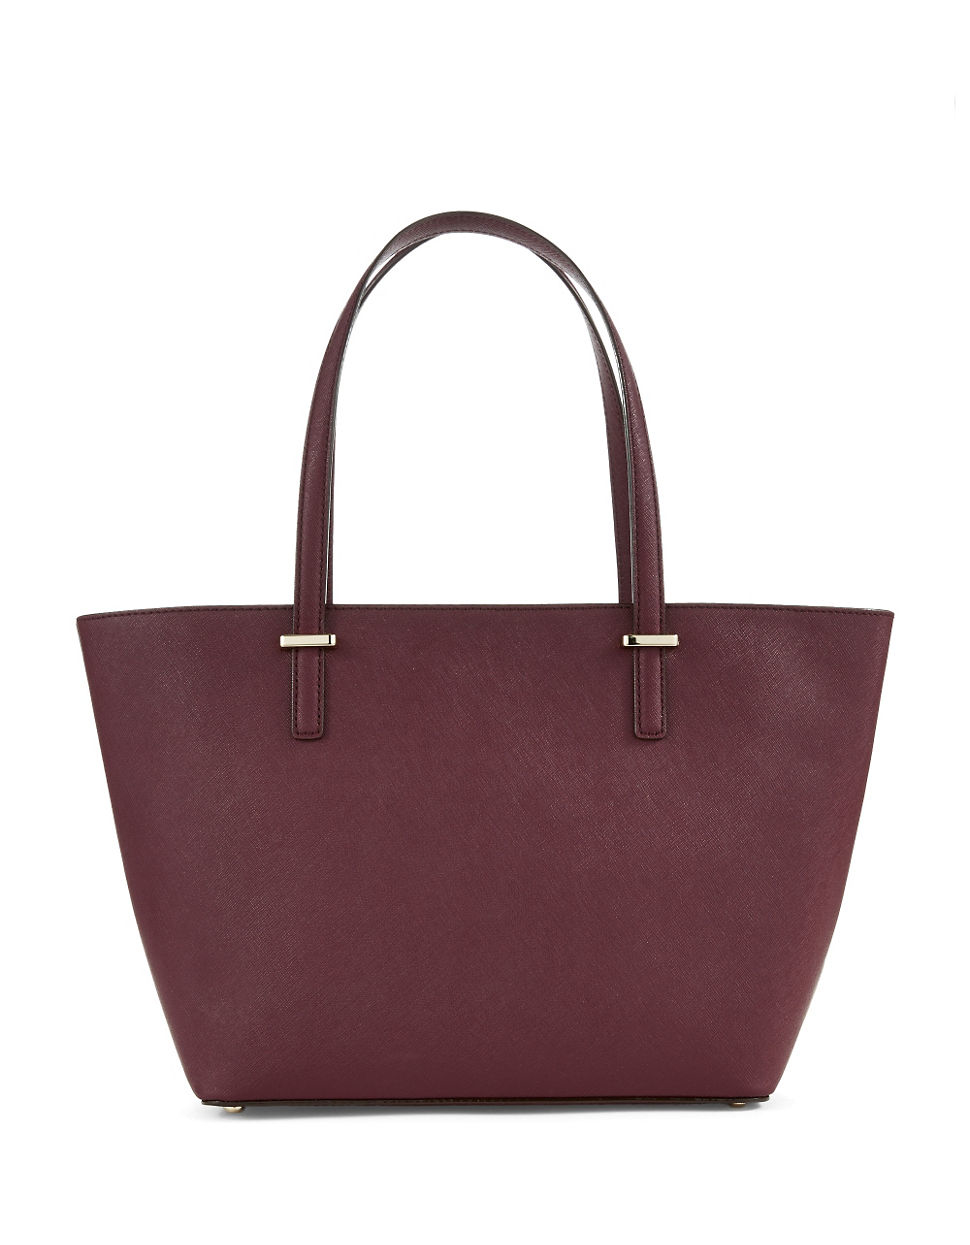 Kate spade Mini Harmony Crosshatched Tote Bag in Purple (Mulled Wine ...